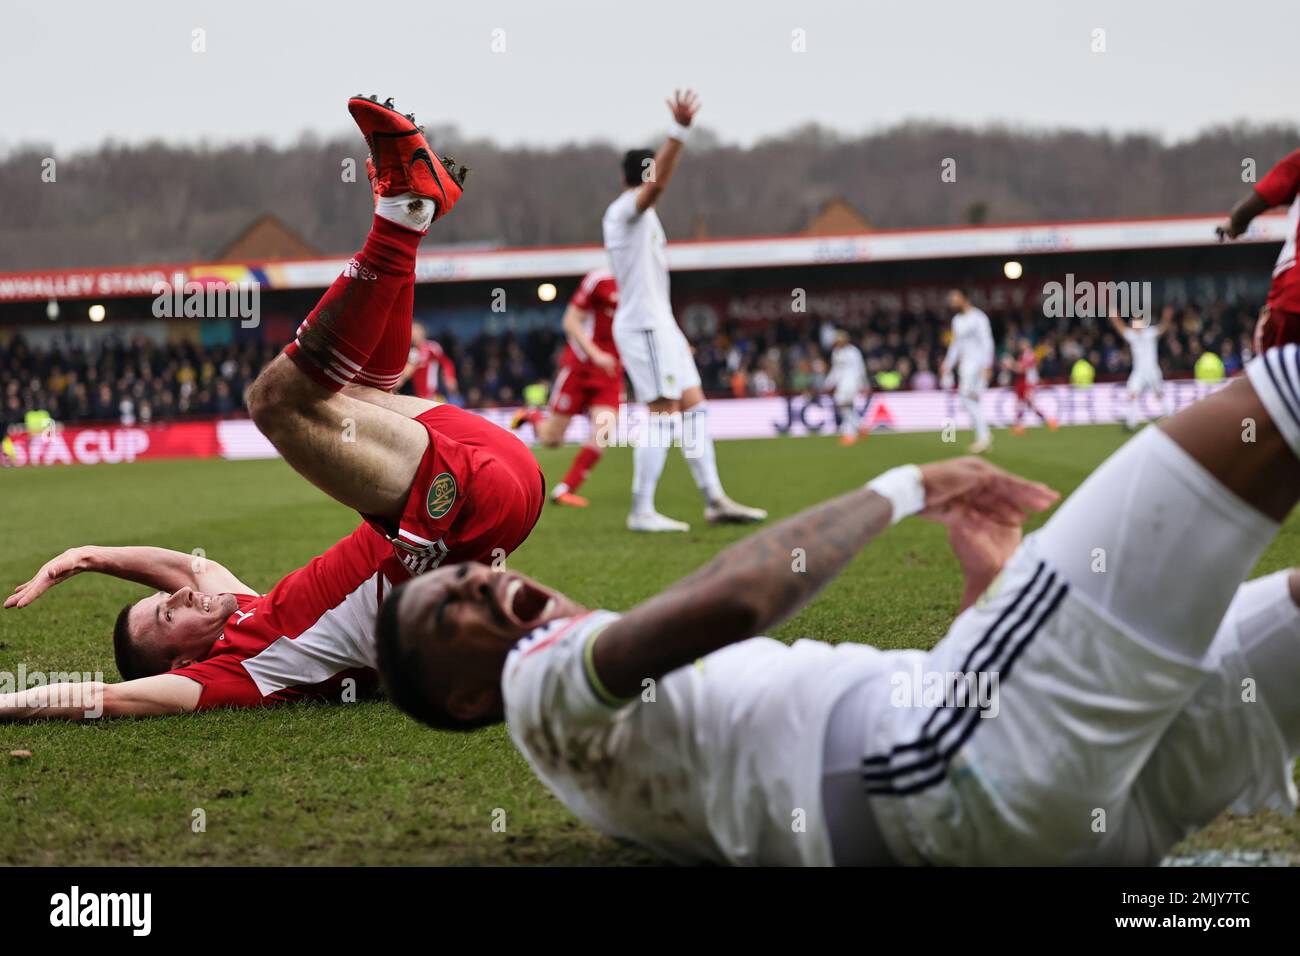 Accrington, UK. 28th Jan 2023. Junior Firpo of Leeds United is upended by Liam Coyle of Accrington Stanley during the FA Cup 4th Round match between Accrington Stanley and Leeds United at the Wham Stadium, Accrington on Saturday 28th January 2023. (Credit: Pat Scaasi | MI News) Credit: MI News & Sport /Alamy Live News Stock Photo